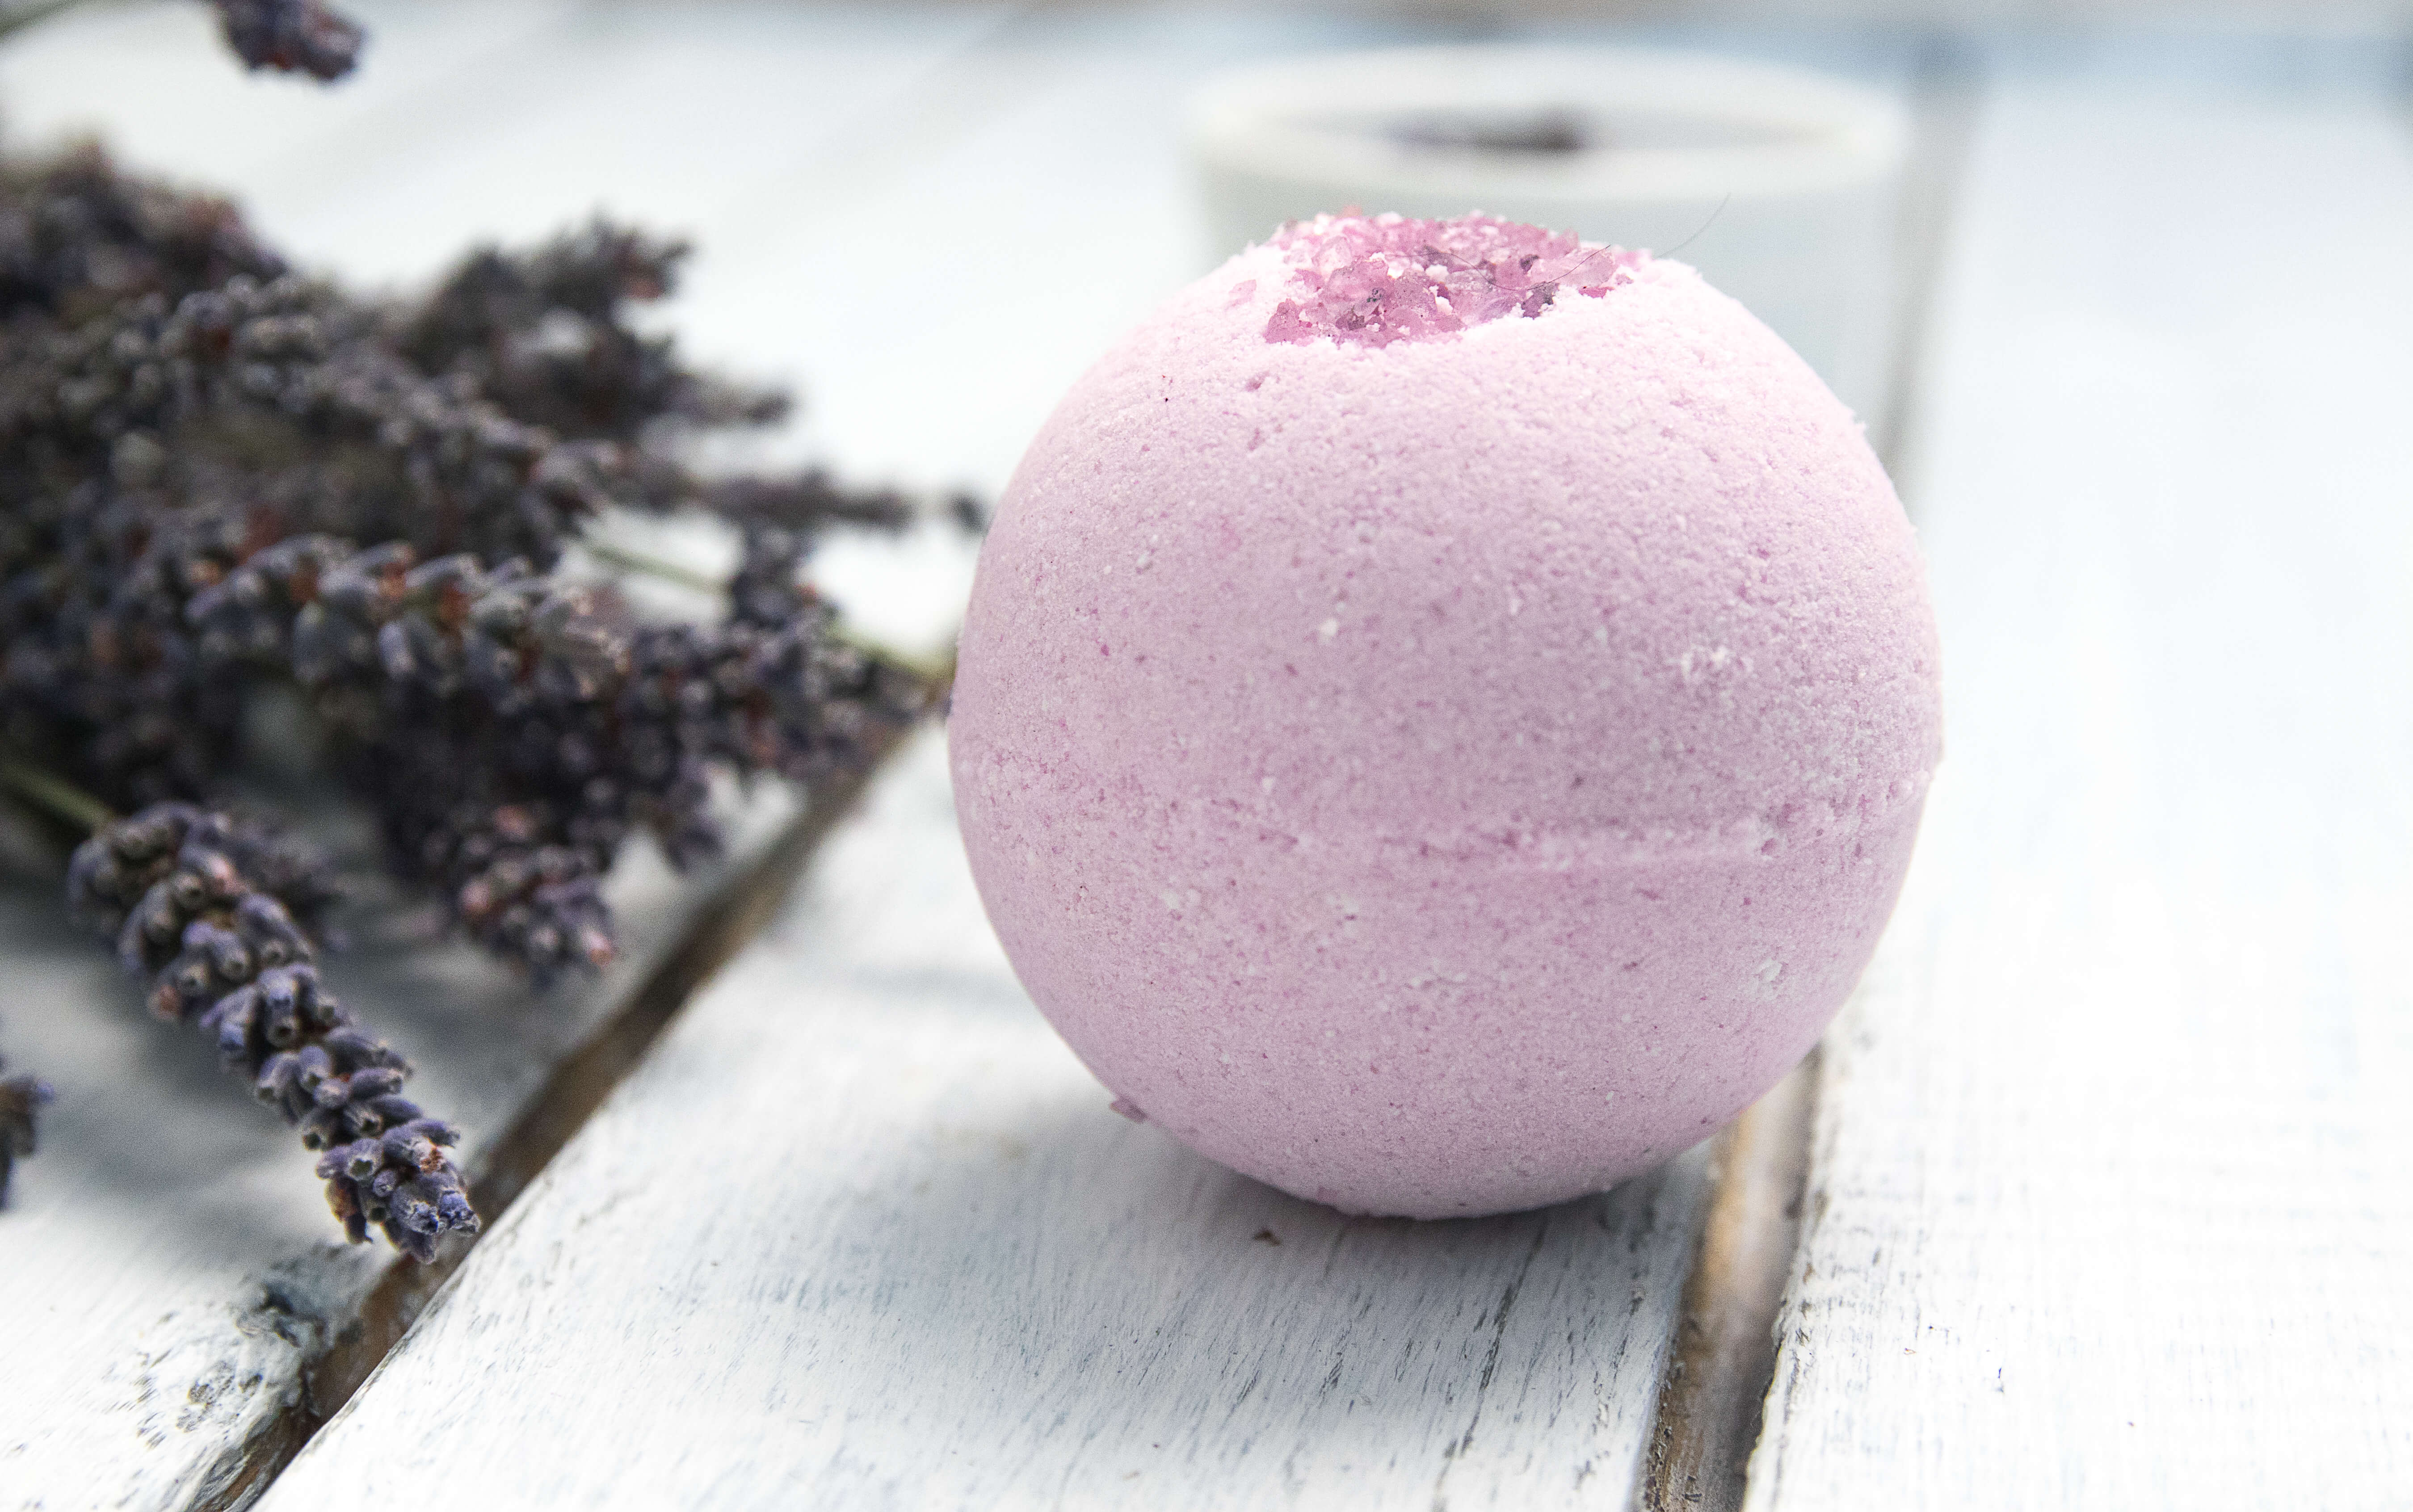 How to Make Bath Bombs at home